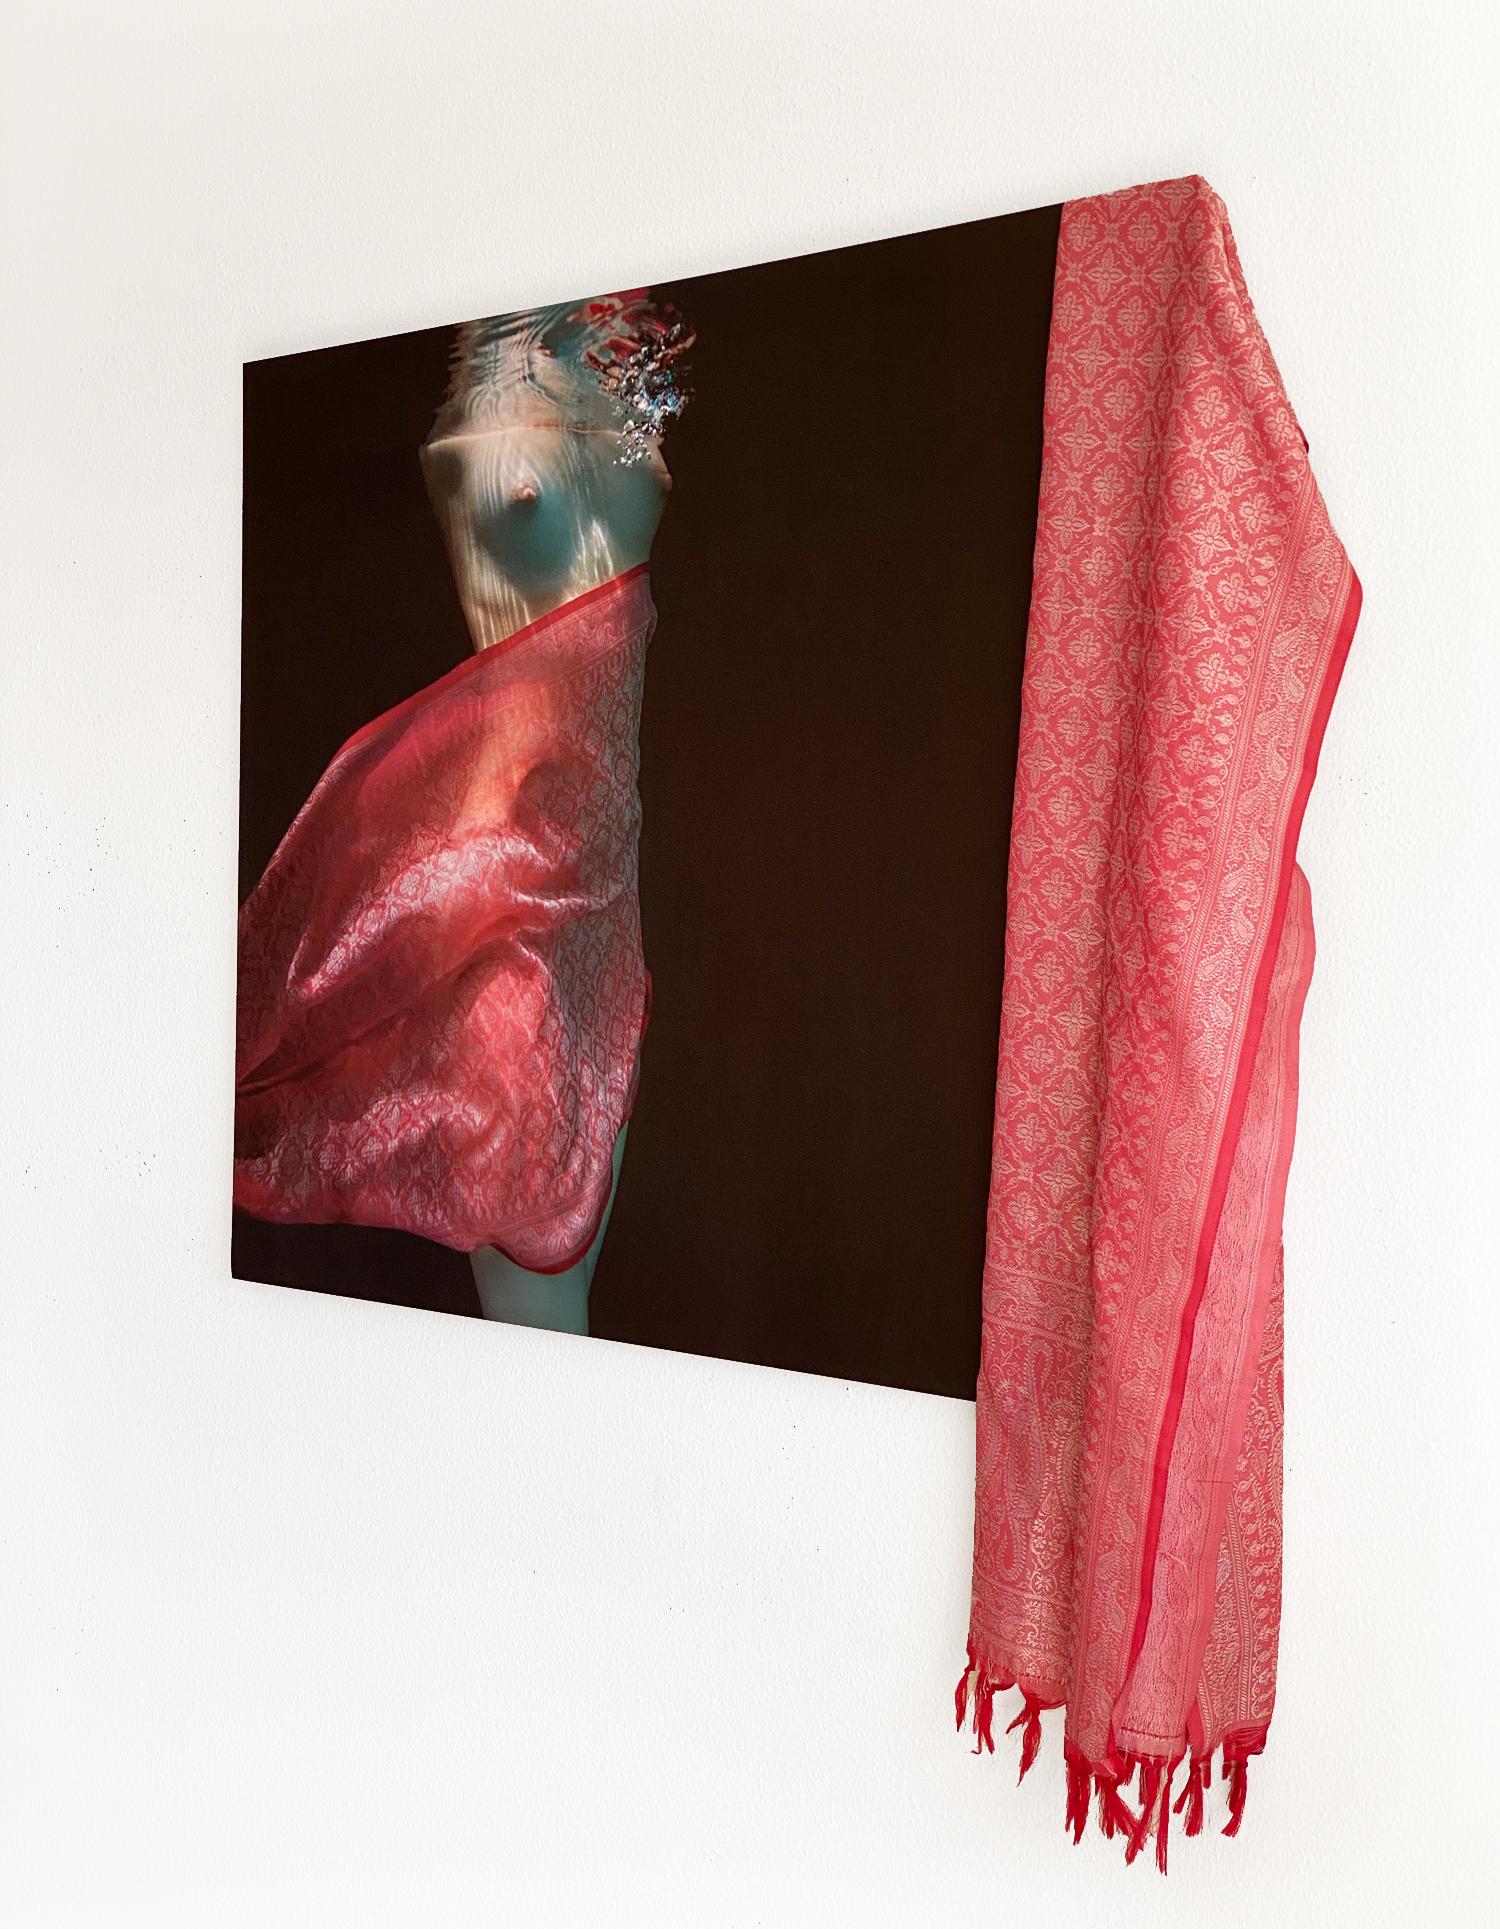 Indian Scarf  - underwater nude photograph - print on aluminum - with the scarf - Photograph by Alex Sher